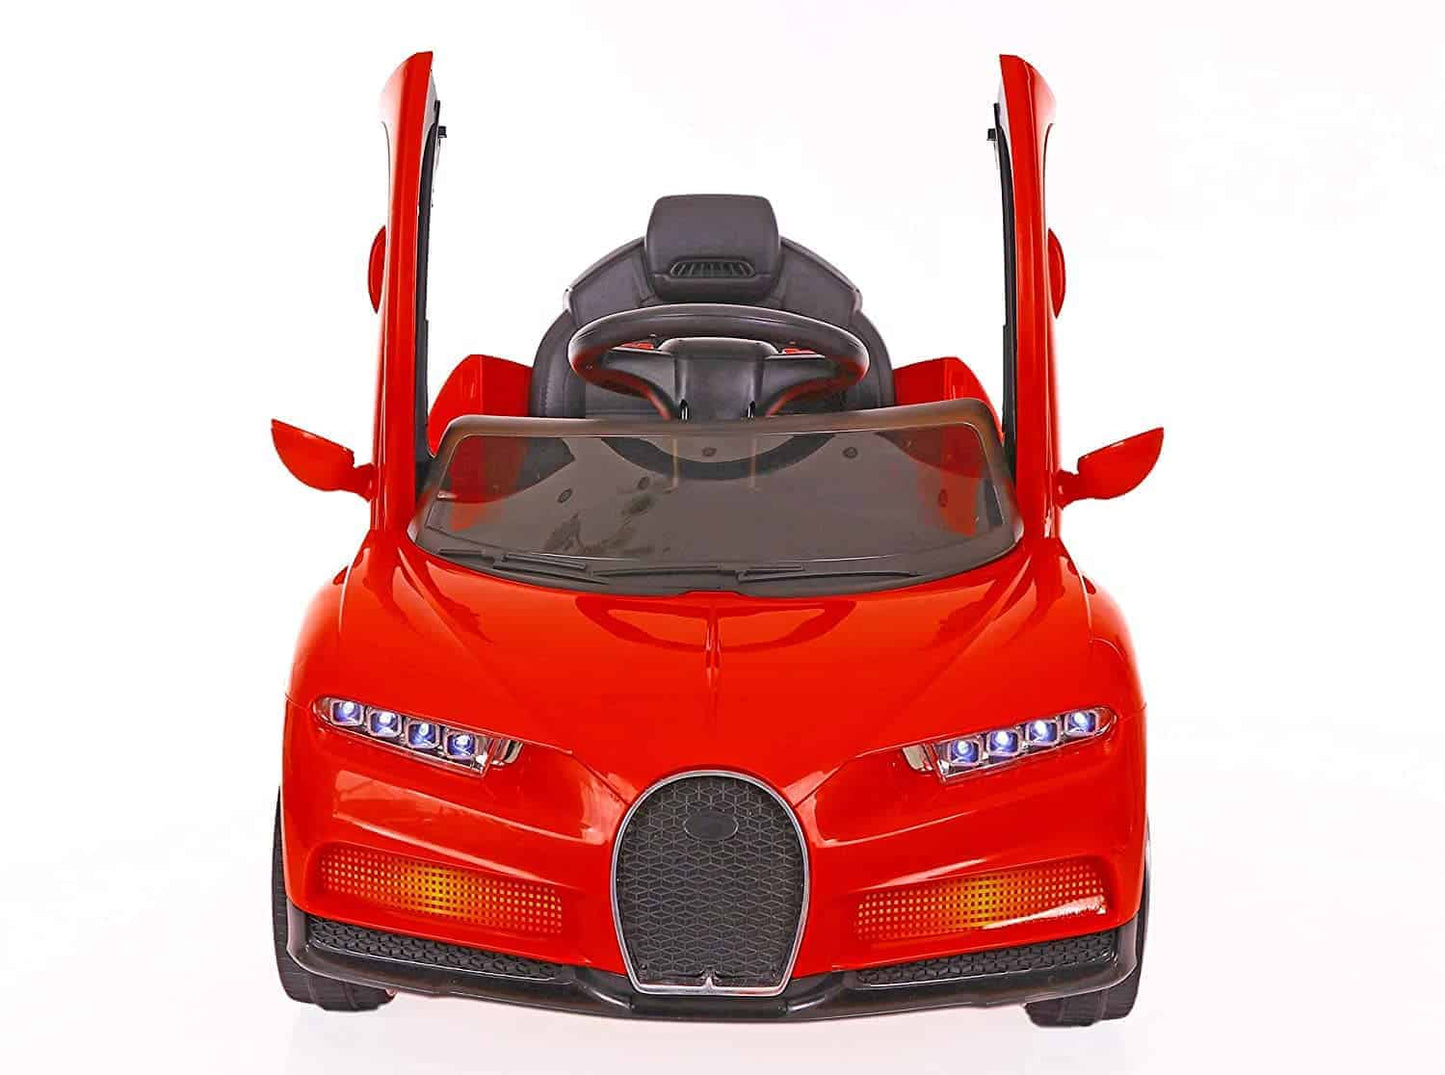 Fliptoy™ mini Bugatti for kids Ride-On Car with Remote for Kids (2 to 4YRS), Red, kids toys cars